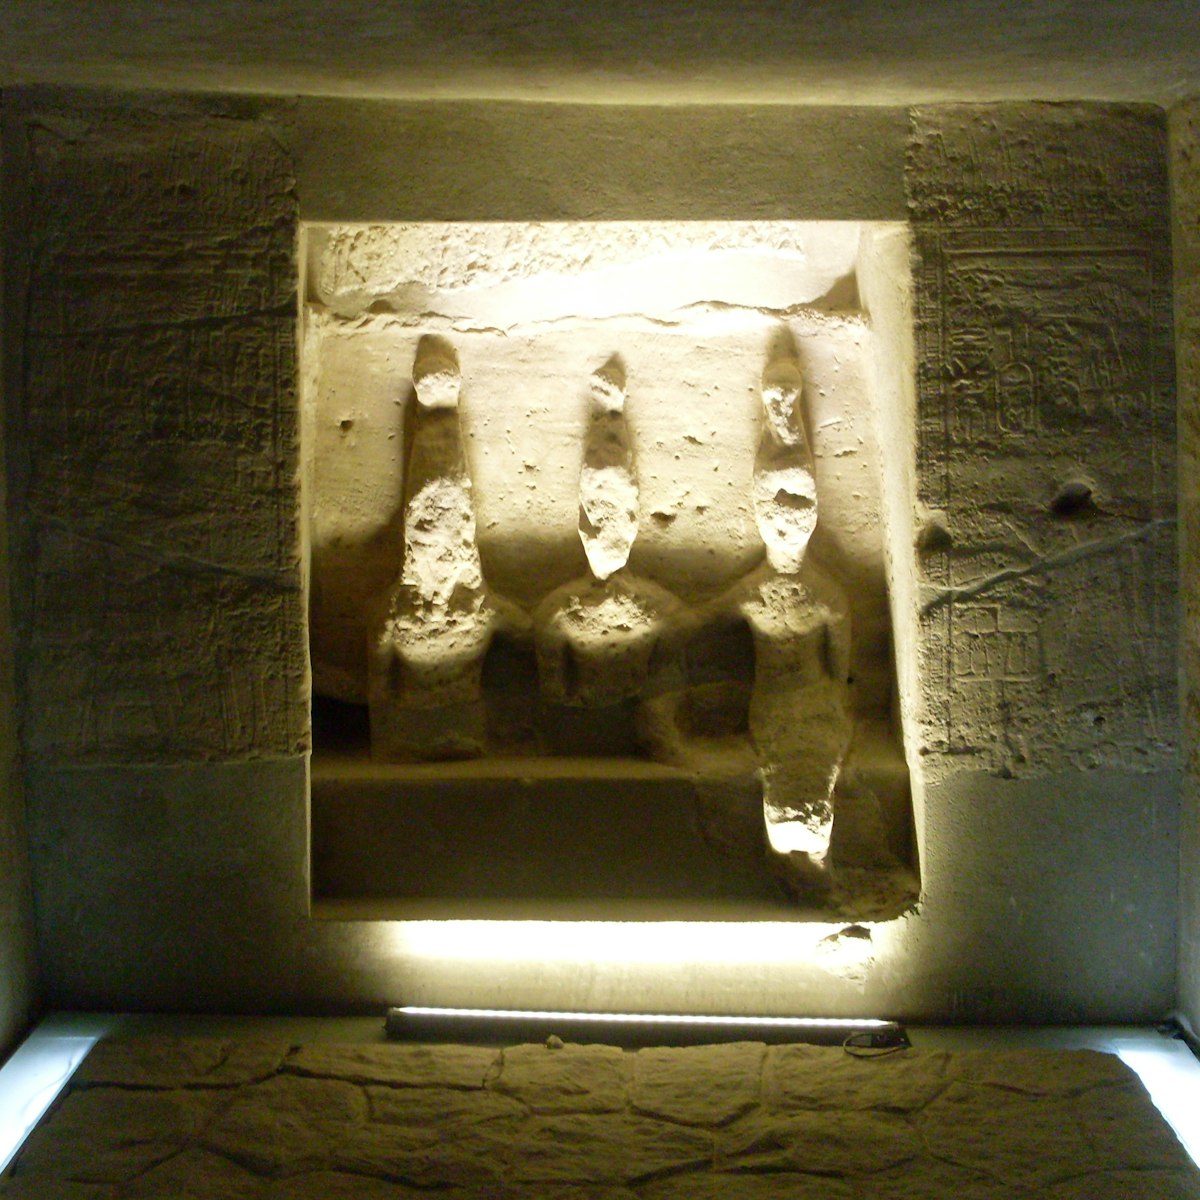 Exhibits of monuments in the Museum of Nubia in Aswan, Egypt.